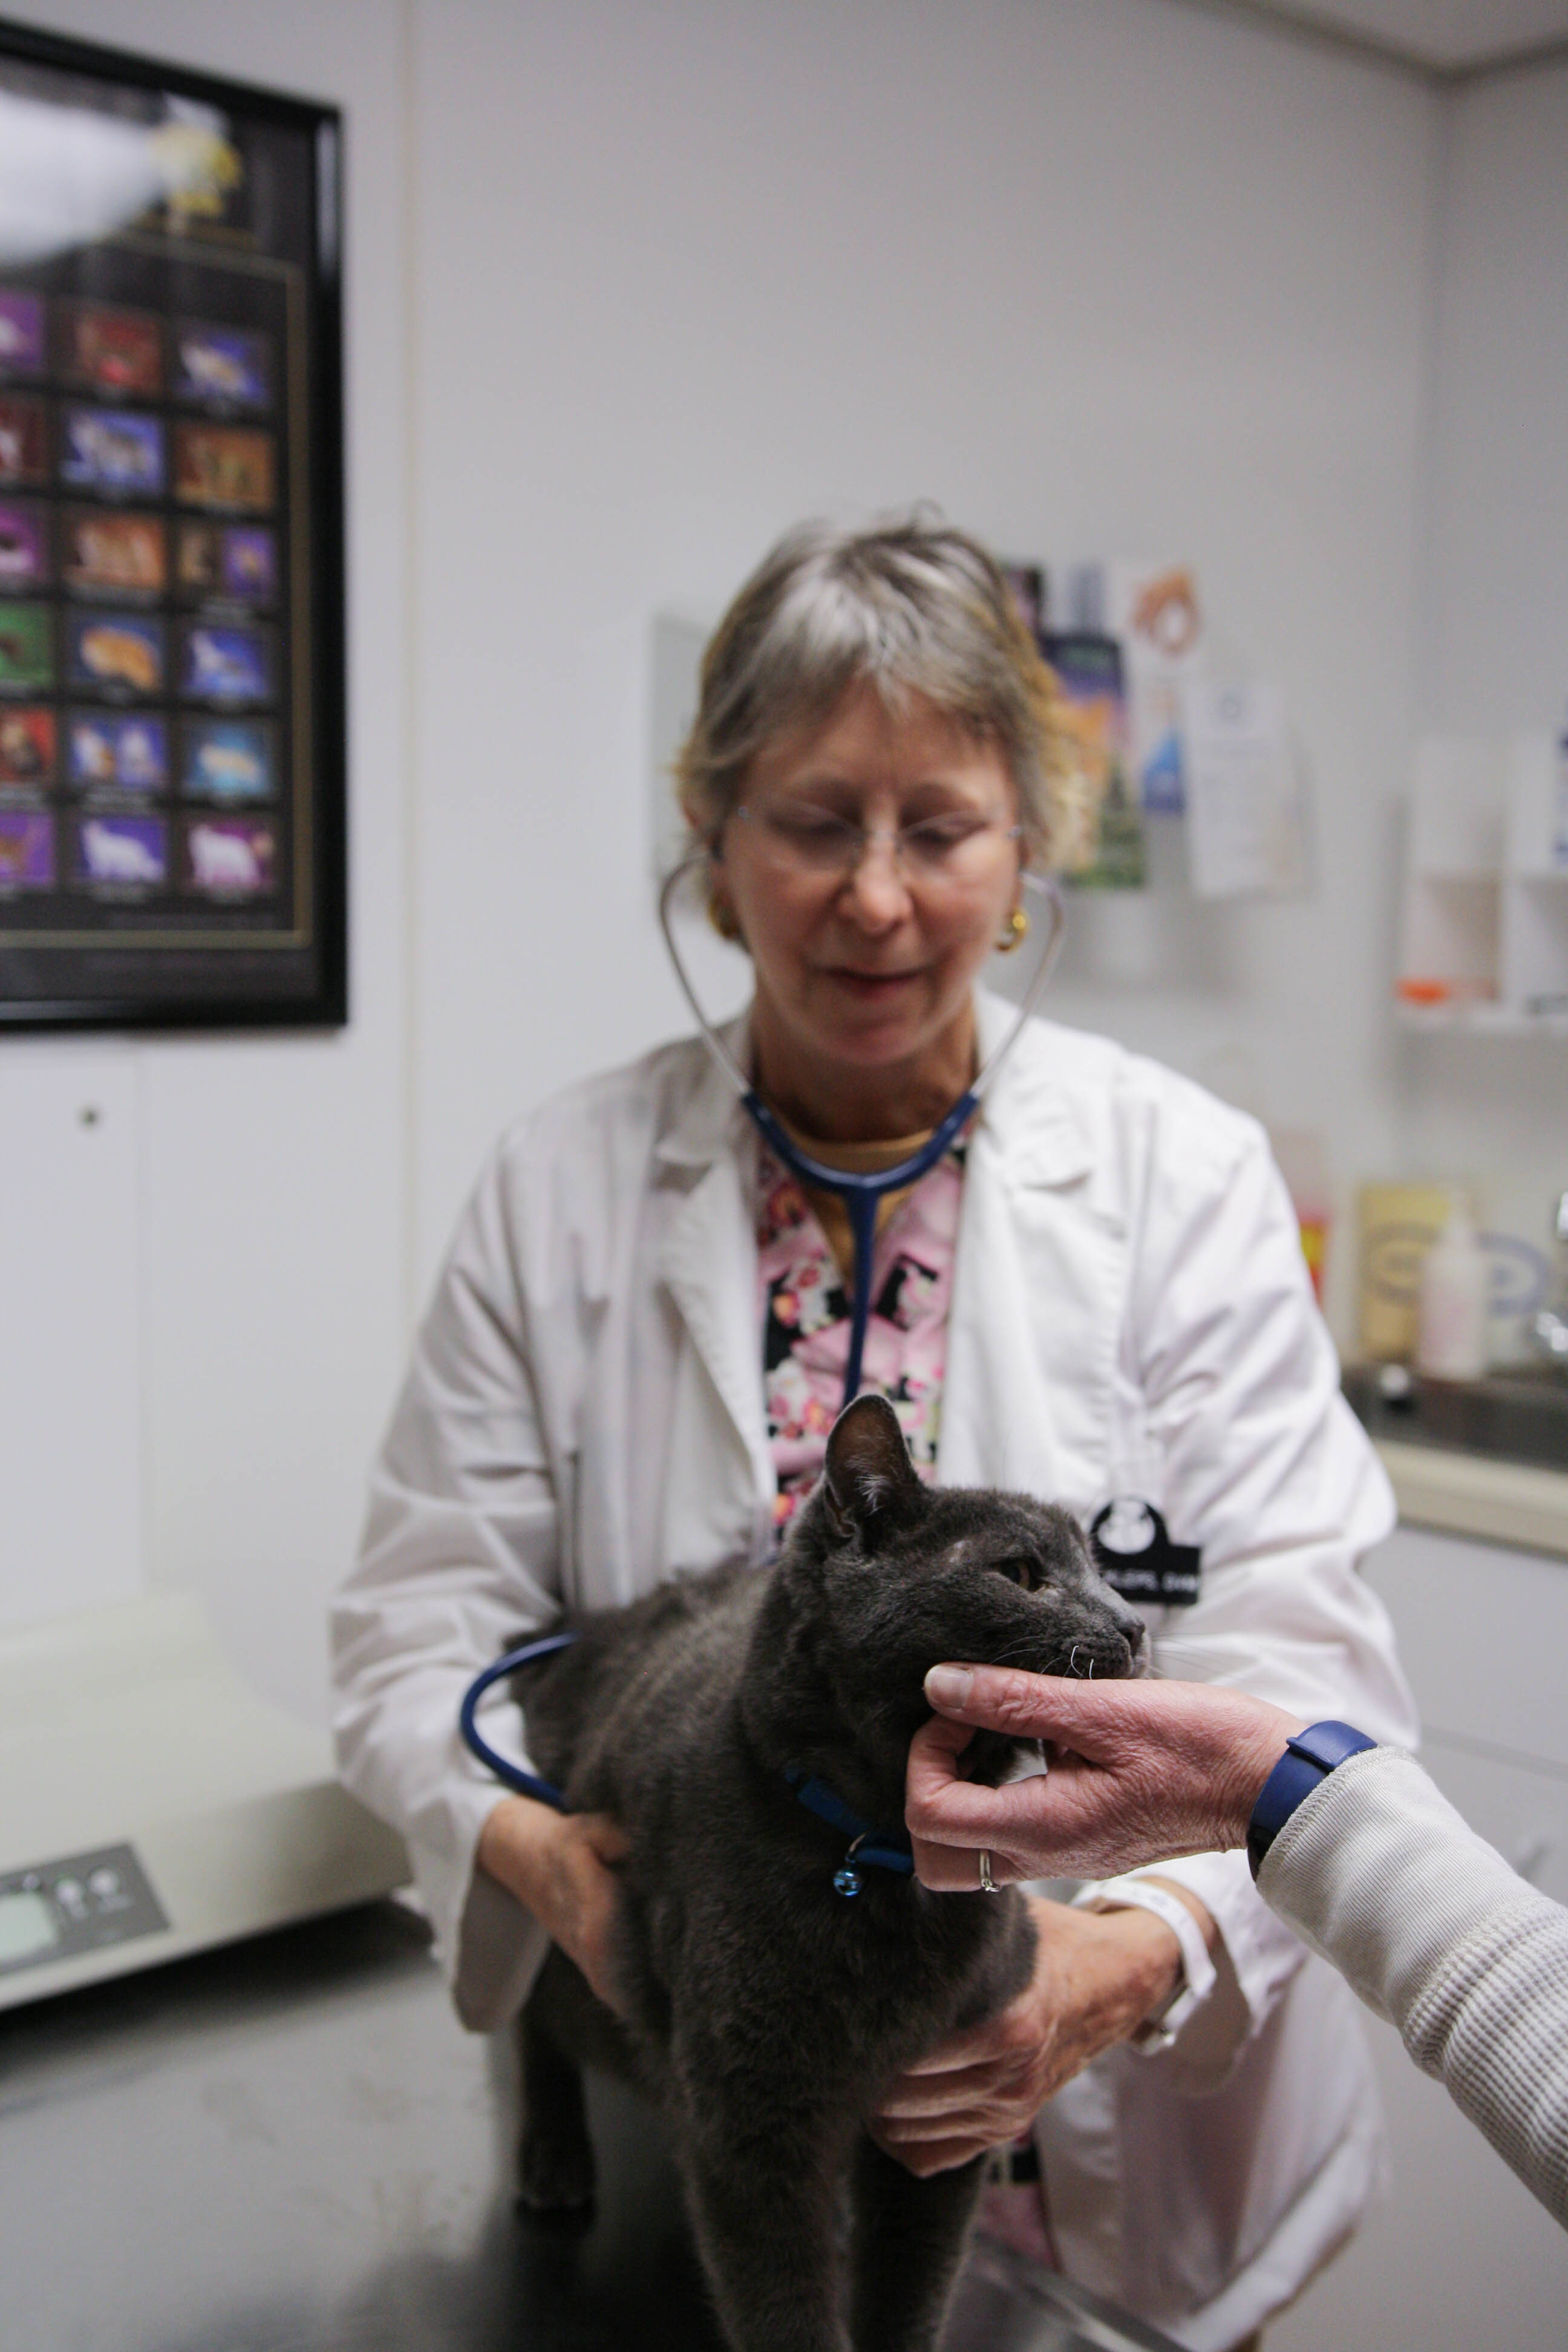 This kitty is well-behaved during her annual wellness exam! Here Dr. Kleps listens to her heart and lungs, and feels her abdominal region, checking for any abnormalities or areas of concern.